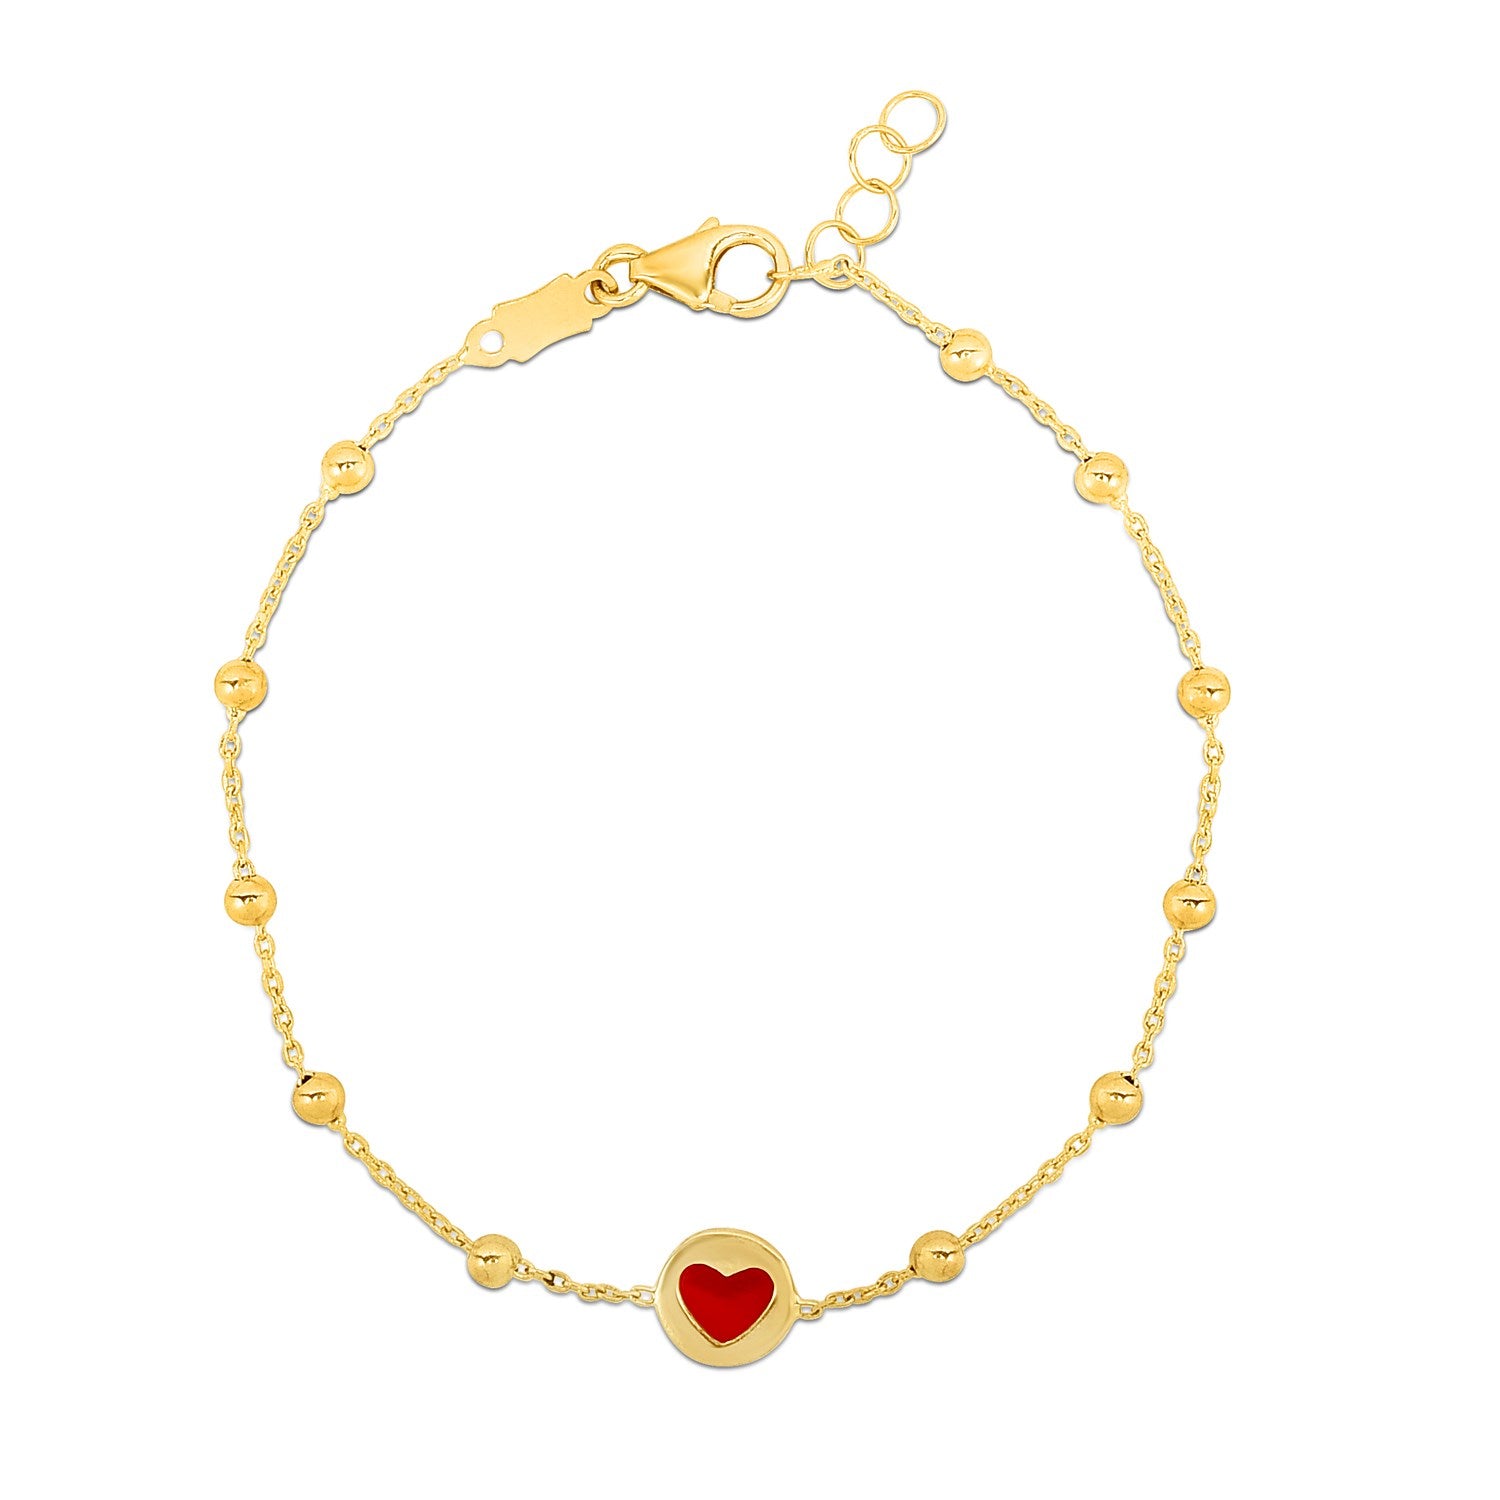 14k Yellow Gold Childrens Bracelet with Beads and Enameled Heart